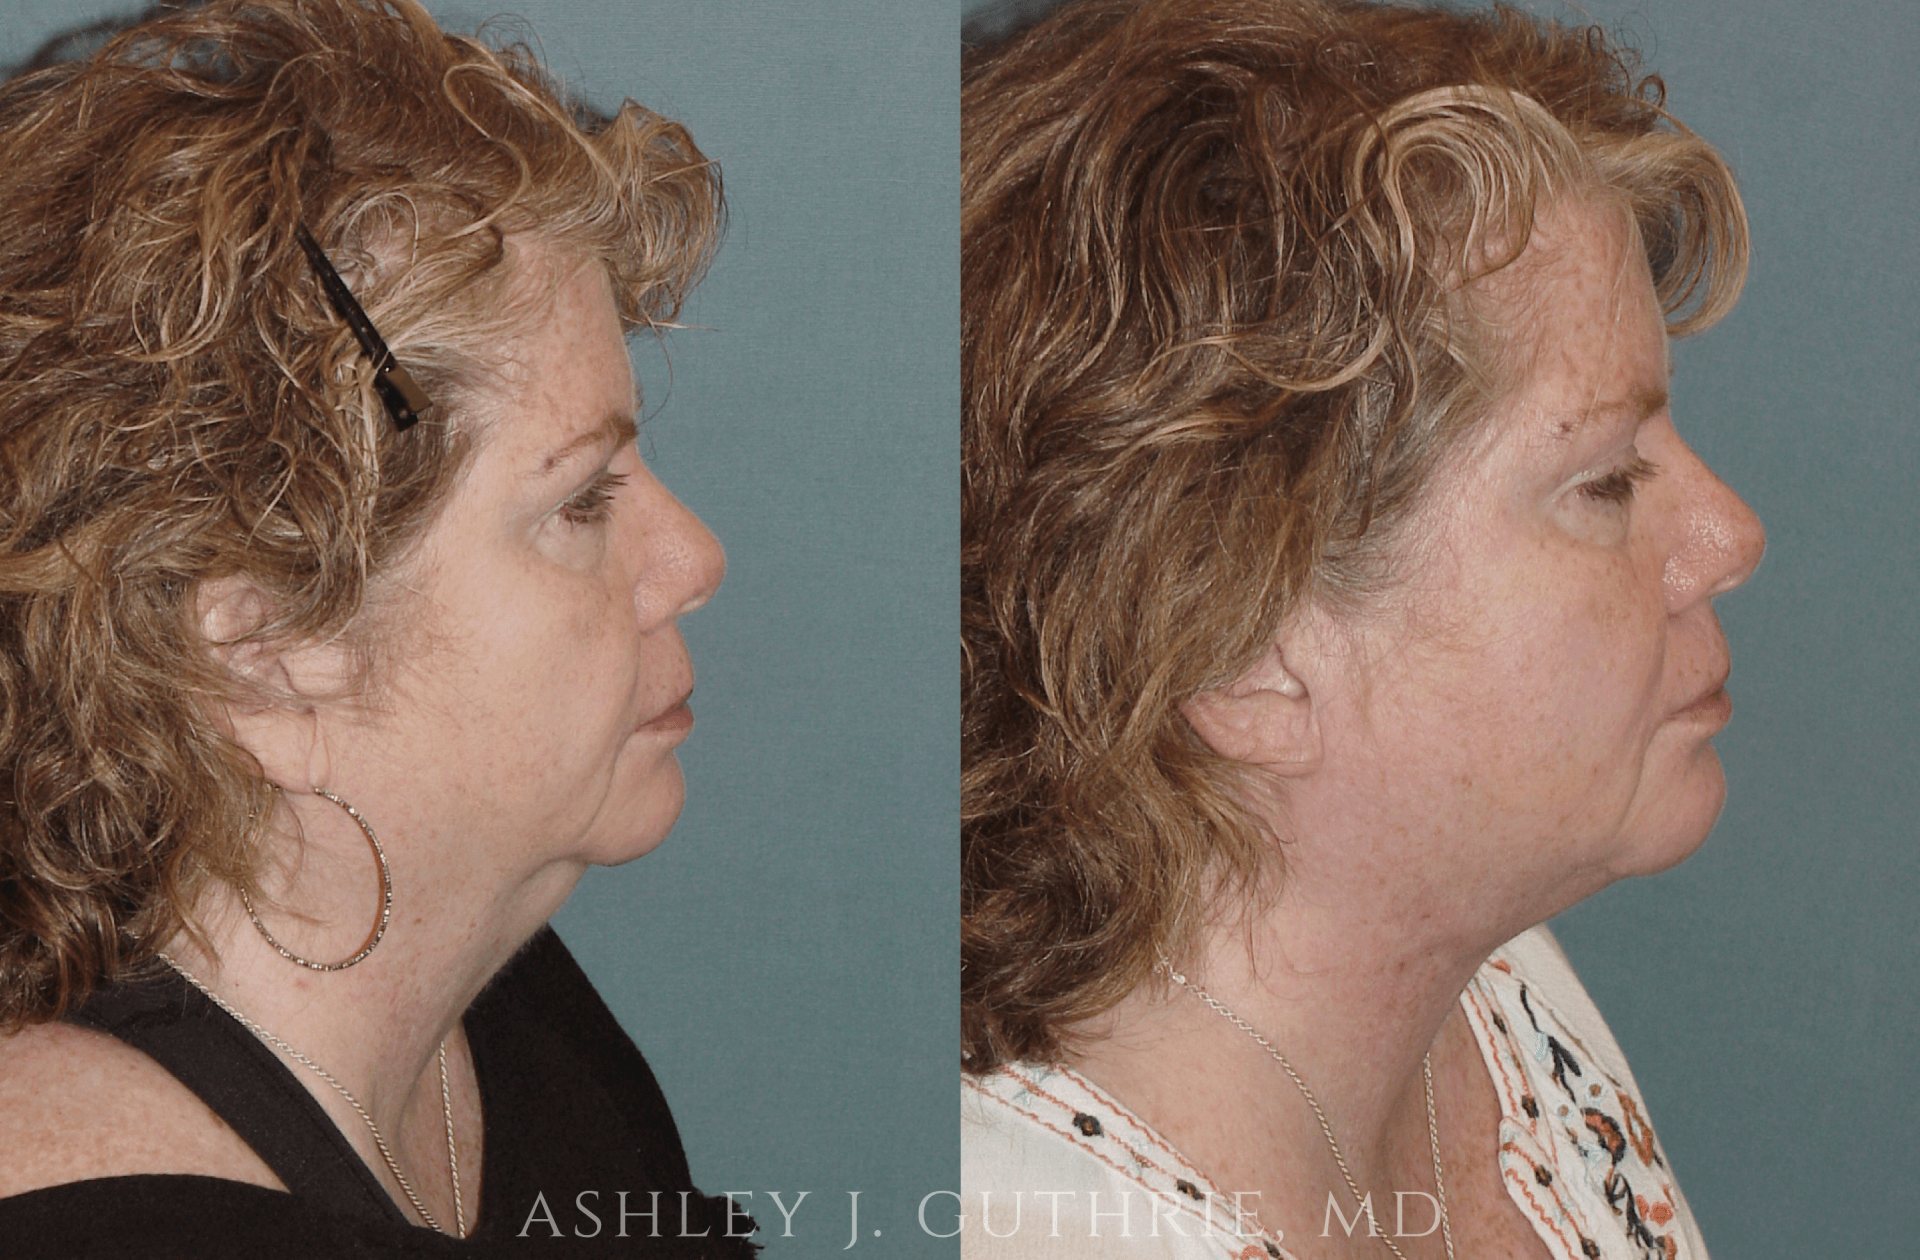 woman before and after chin implant procedure